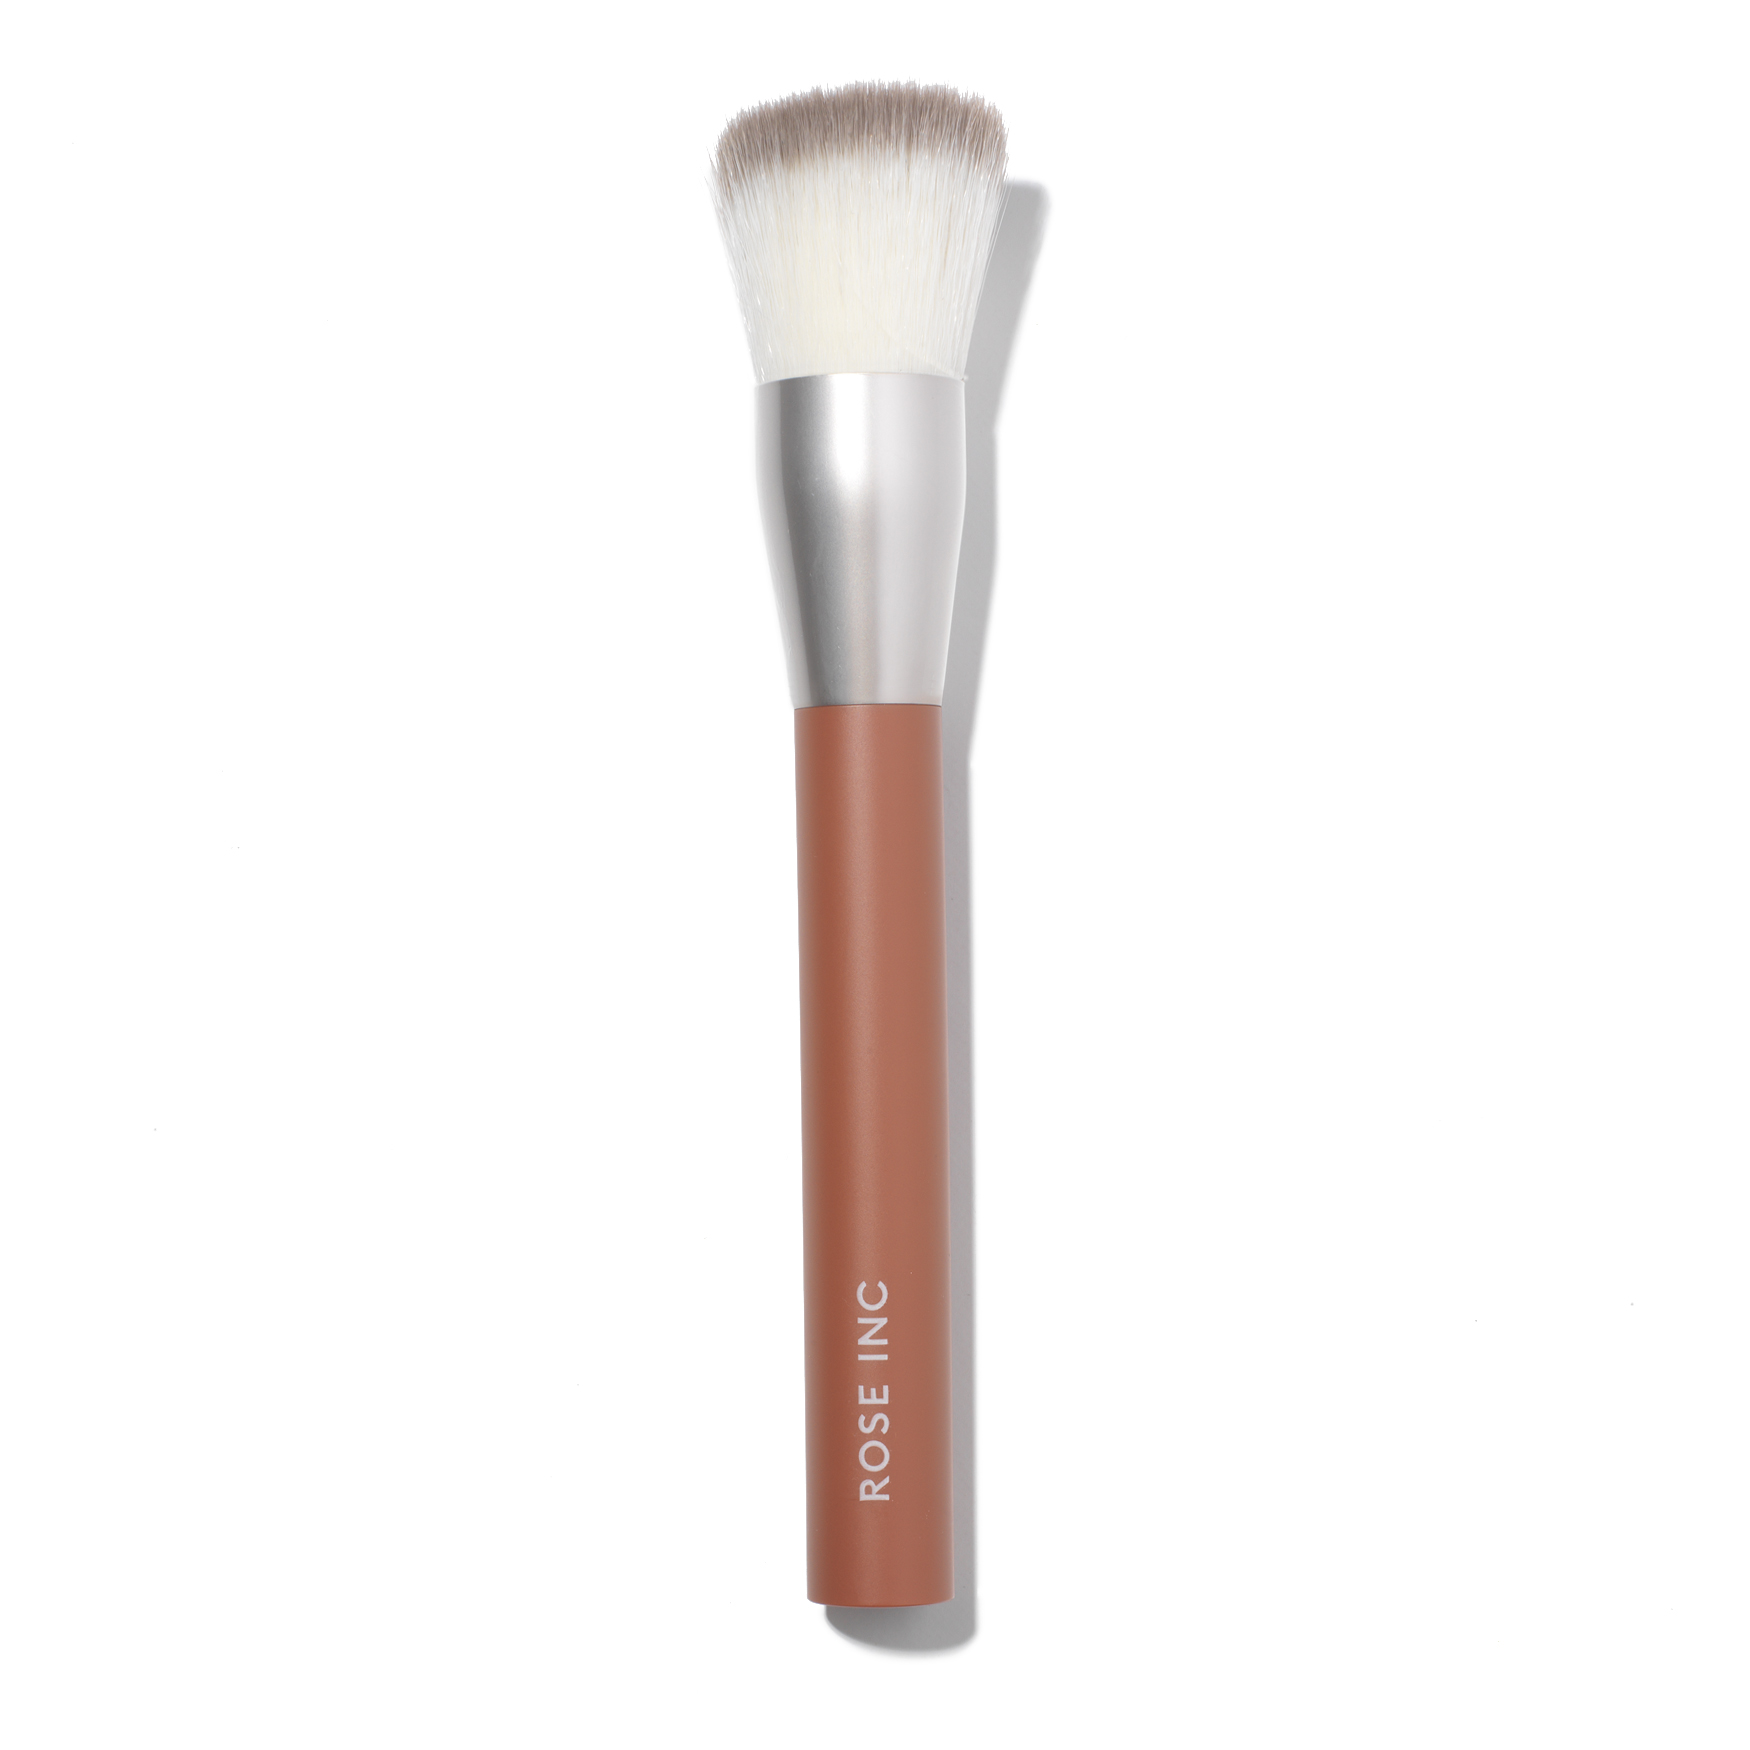 Rose Inc Number 3 Foundation Brush | Space NK